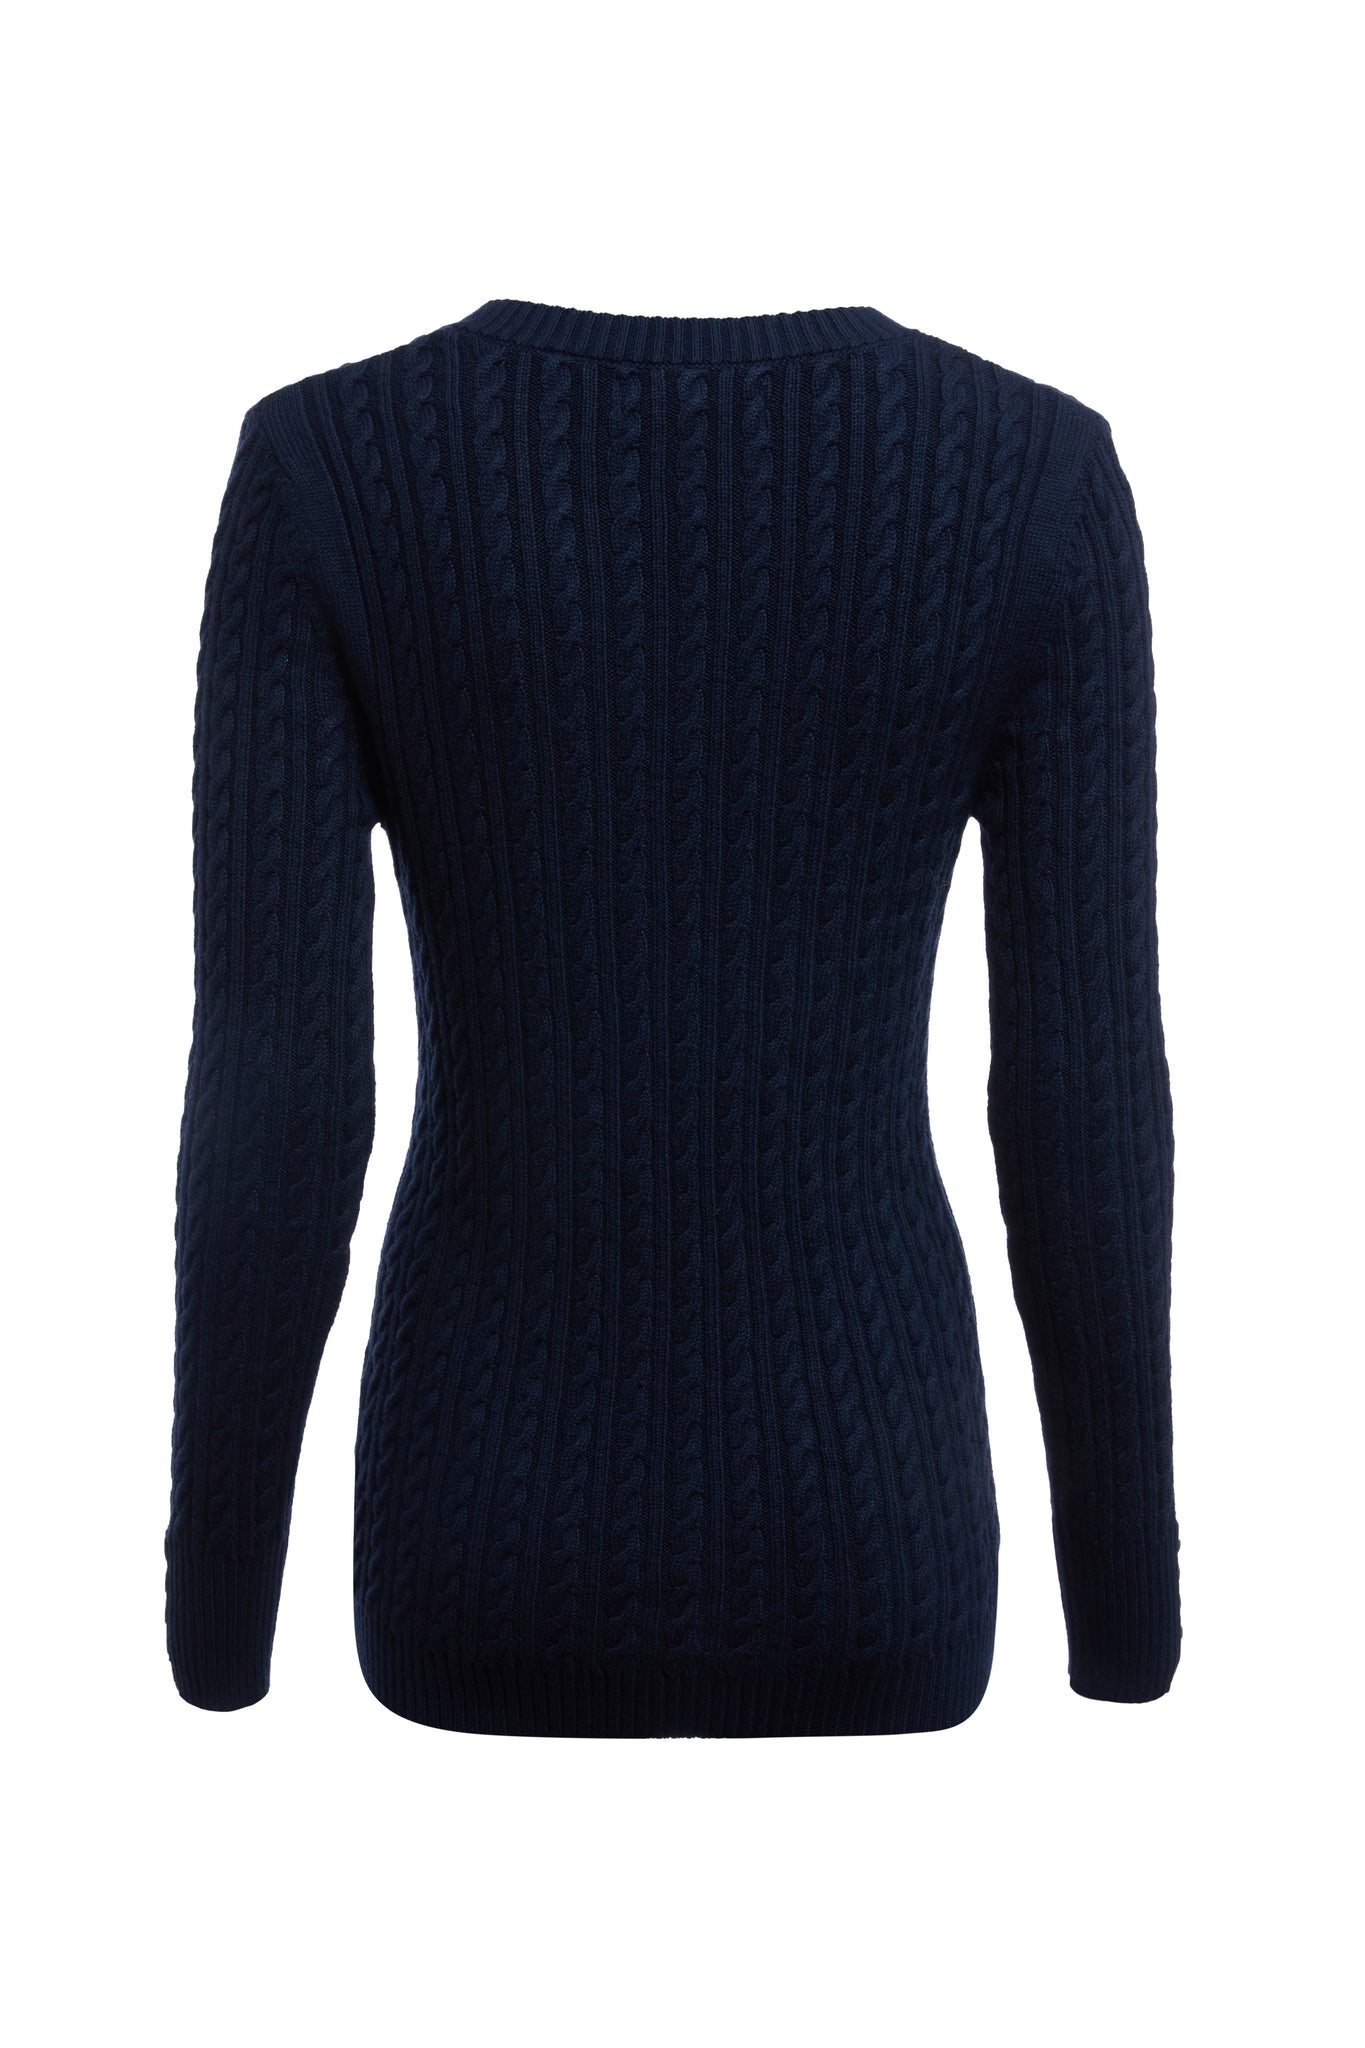 back of womens lightweight v neck cable knit jumper in navy detailed with gold buttons at the cuffs